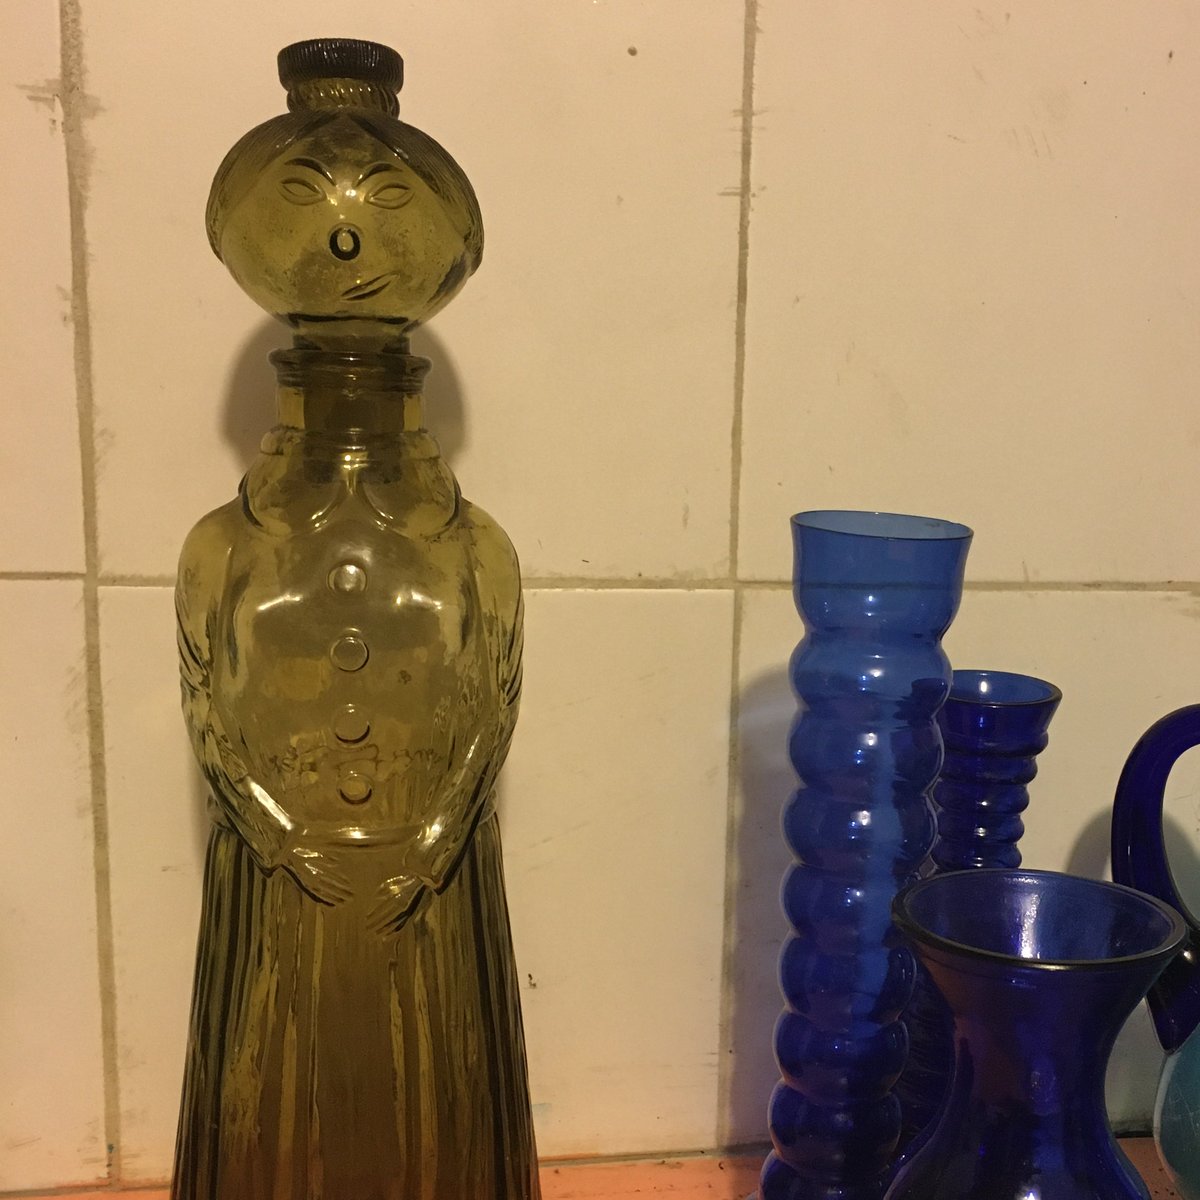 Ok, my friends in Italy; help me out with this one: what and when is this snarky green glass lady-shaped bottle from?!?!?